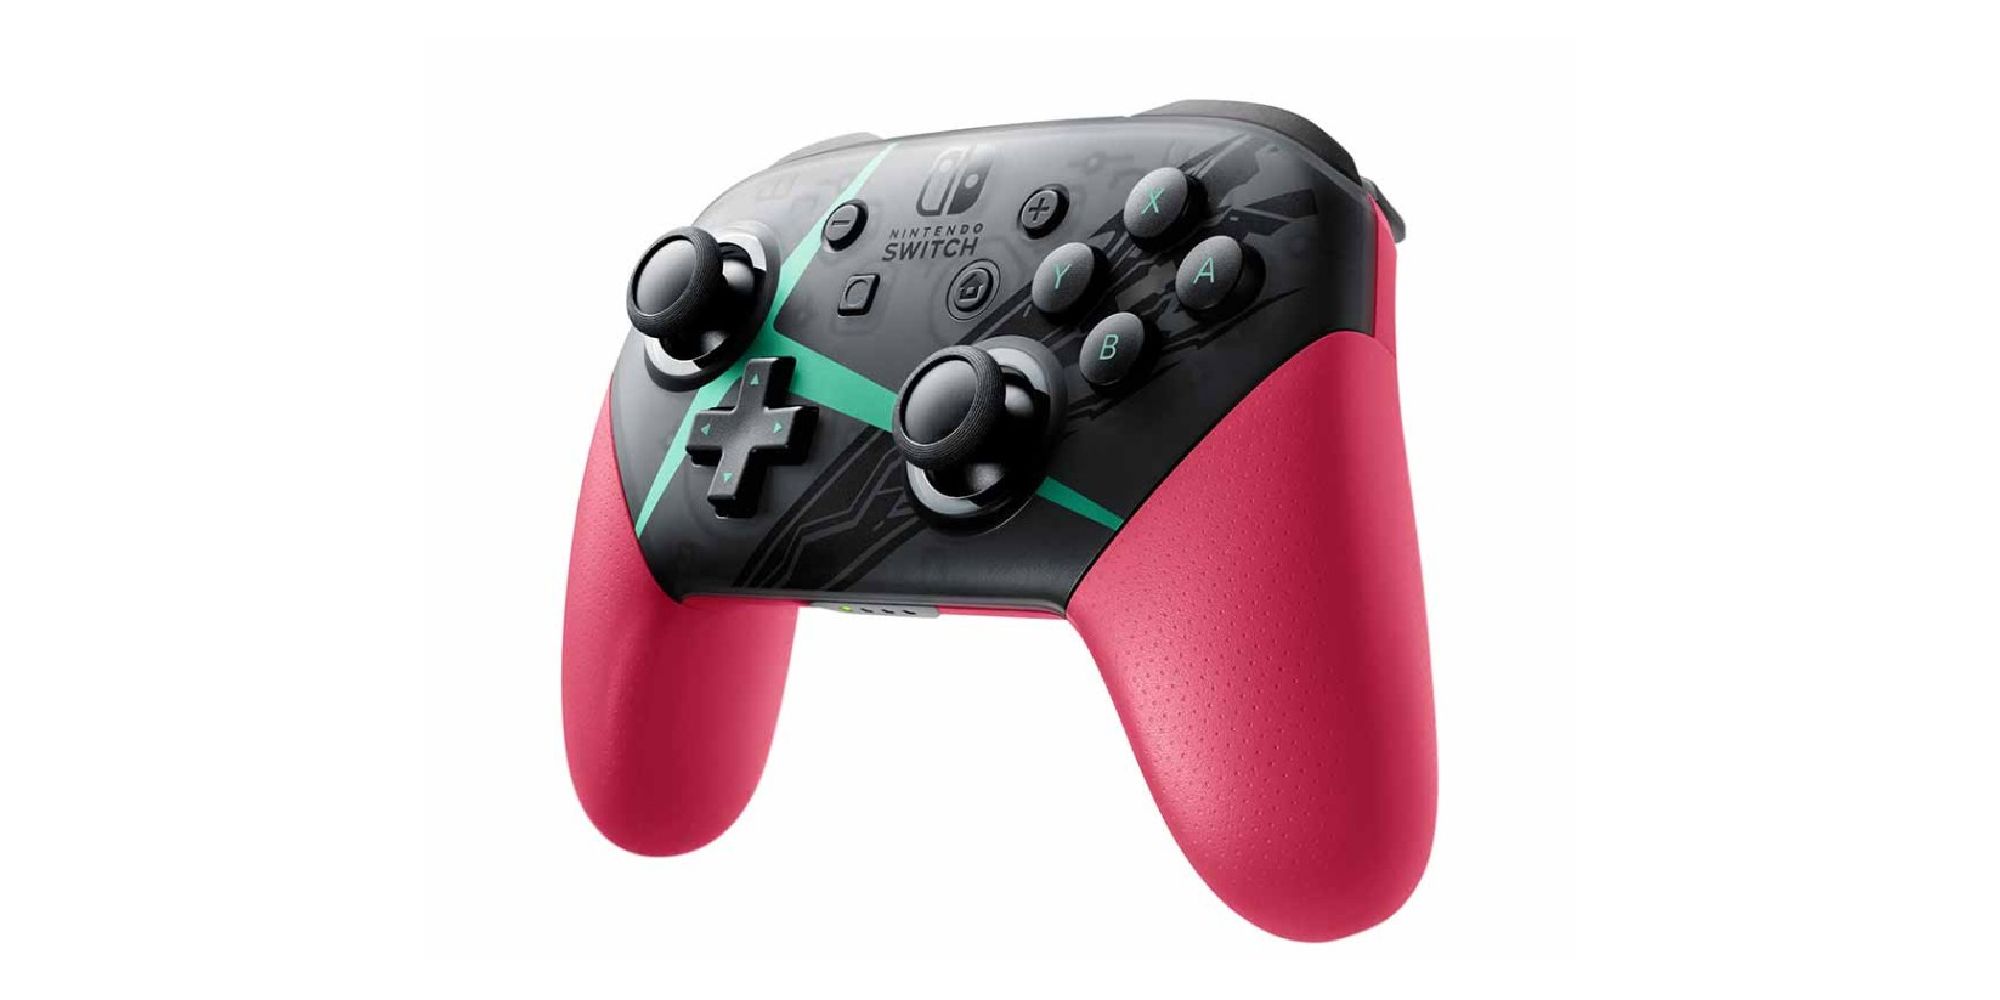 Switch Accessories close up of a Xenoblade Chronicles 2 Pro Controller with a black body and pink handles